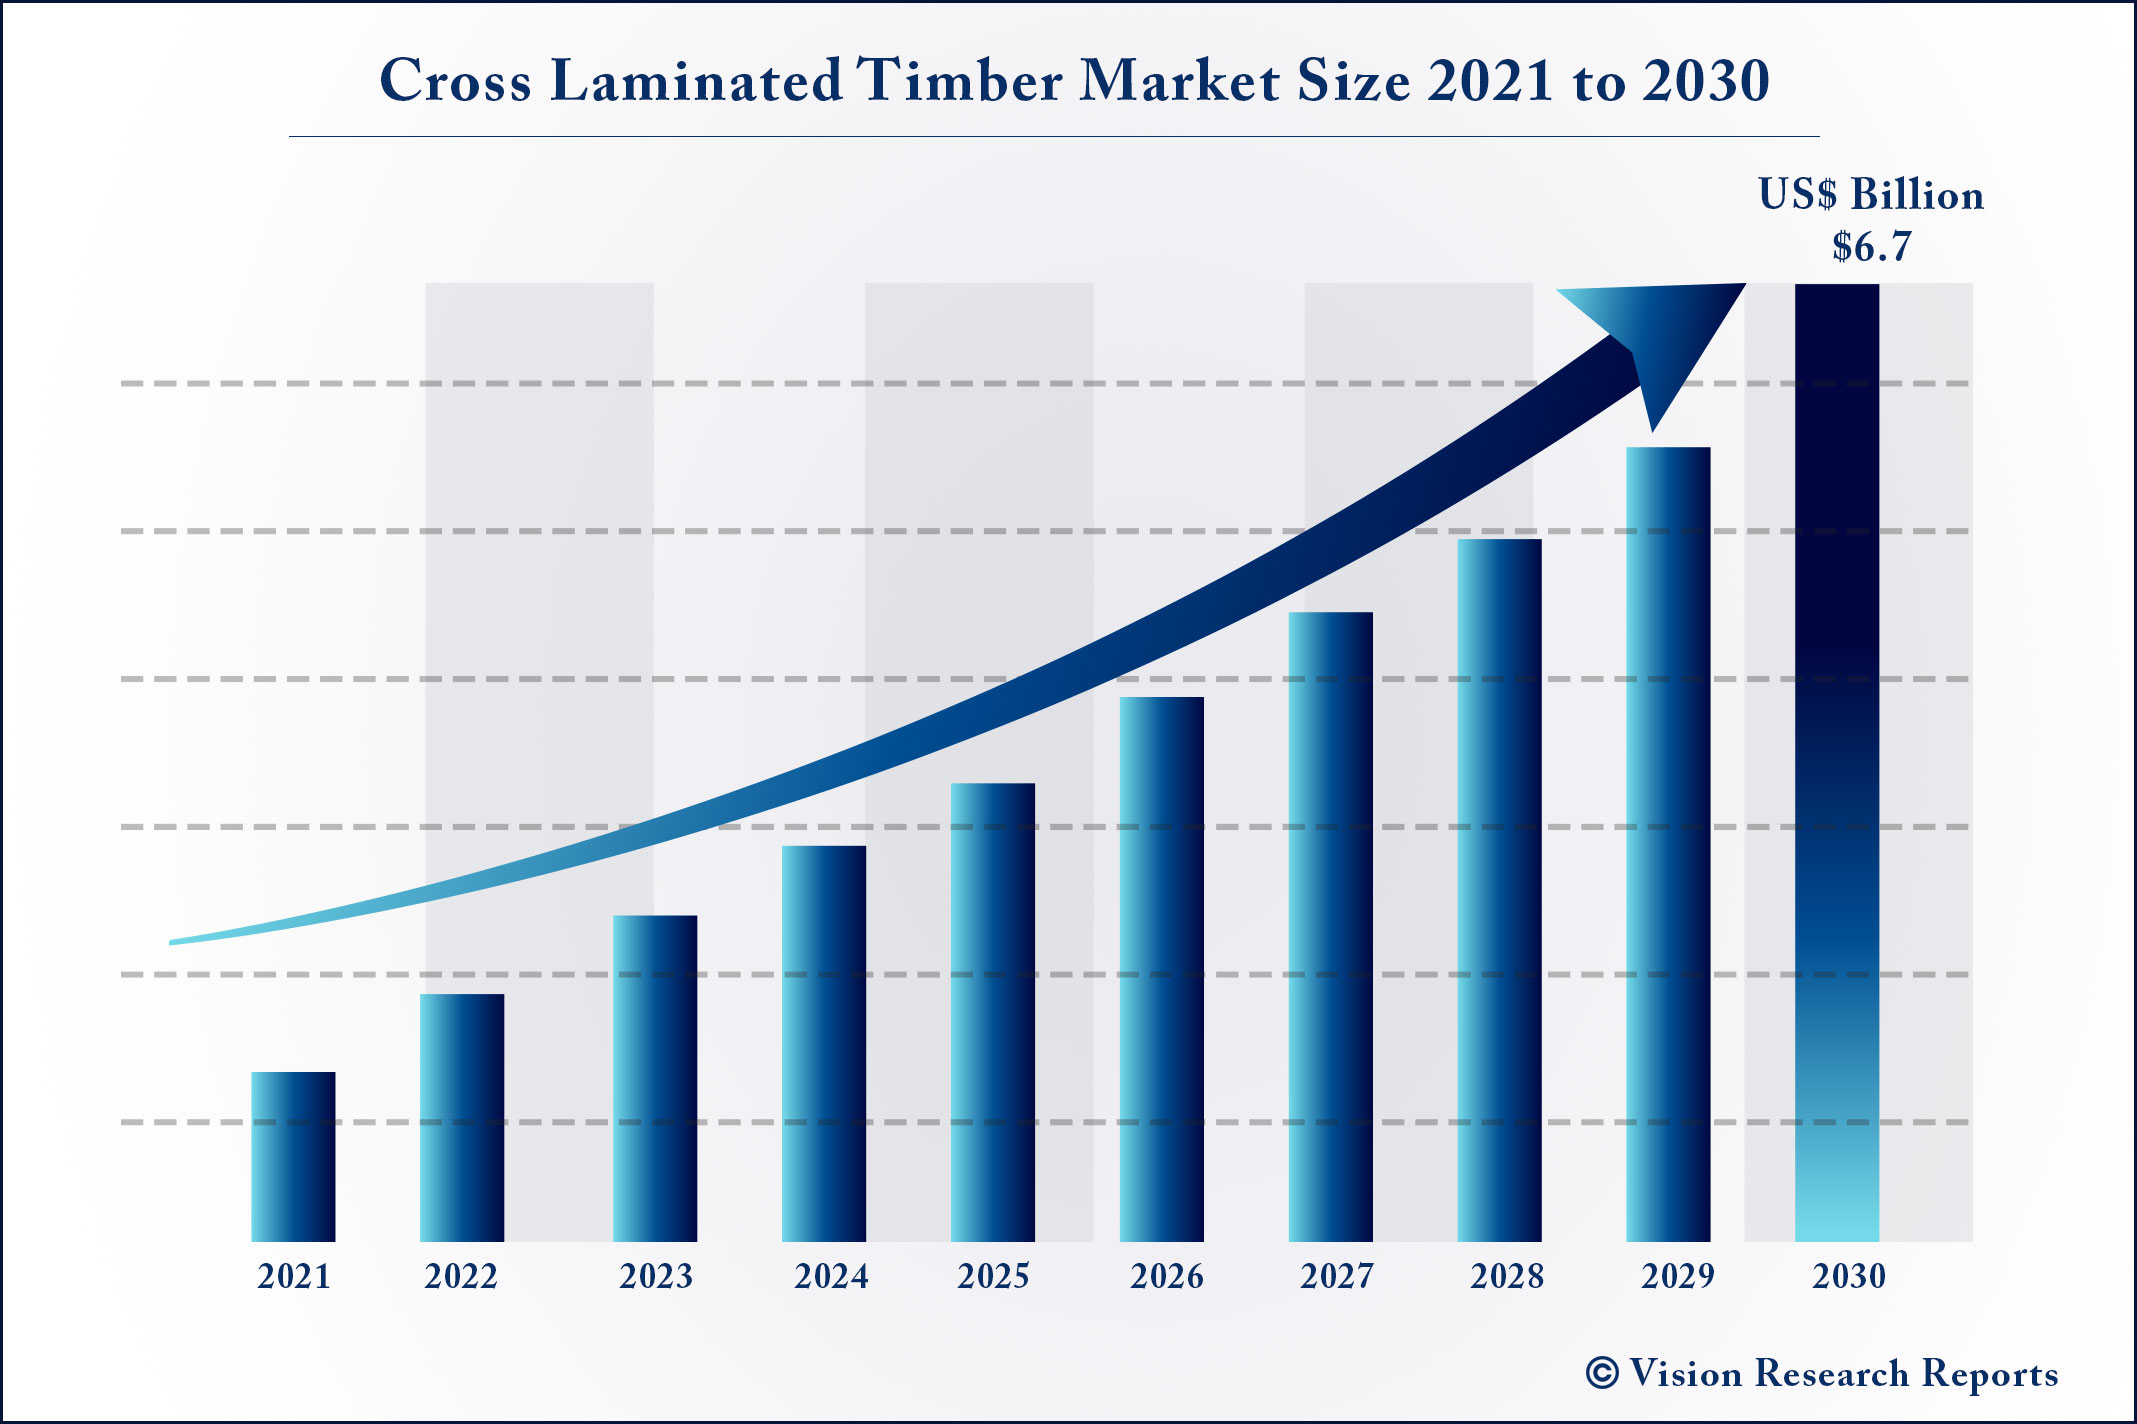 Cross Laminated Timber Market Size 2021 to 2030